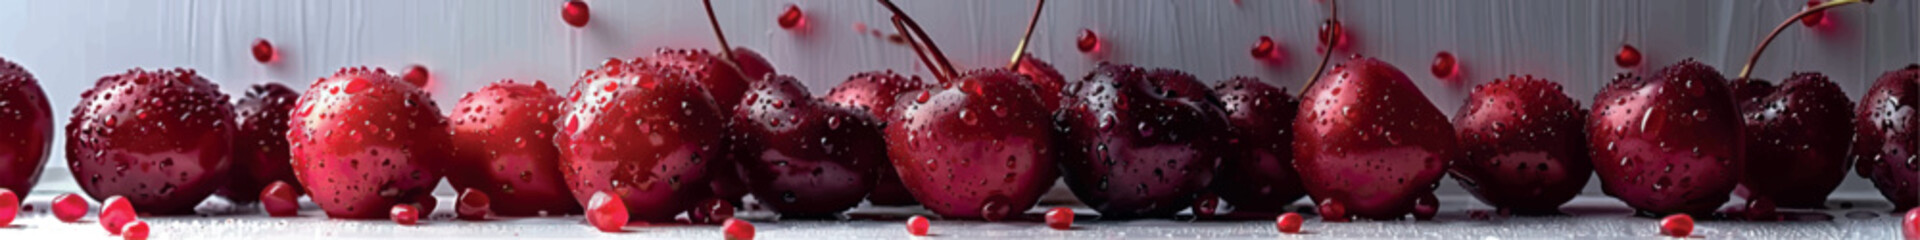 Juicy cherries. Red cherries on a white background for banner, cover, label. Ripe cherry. Cherry juice, jam, dessert. Berry background. Fruit background.